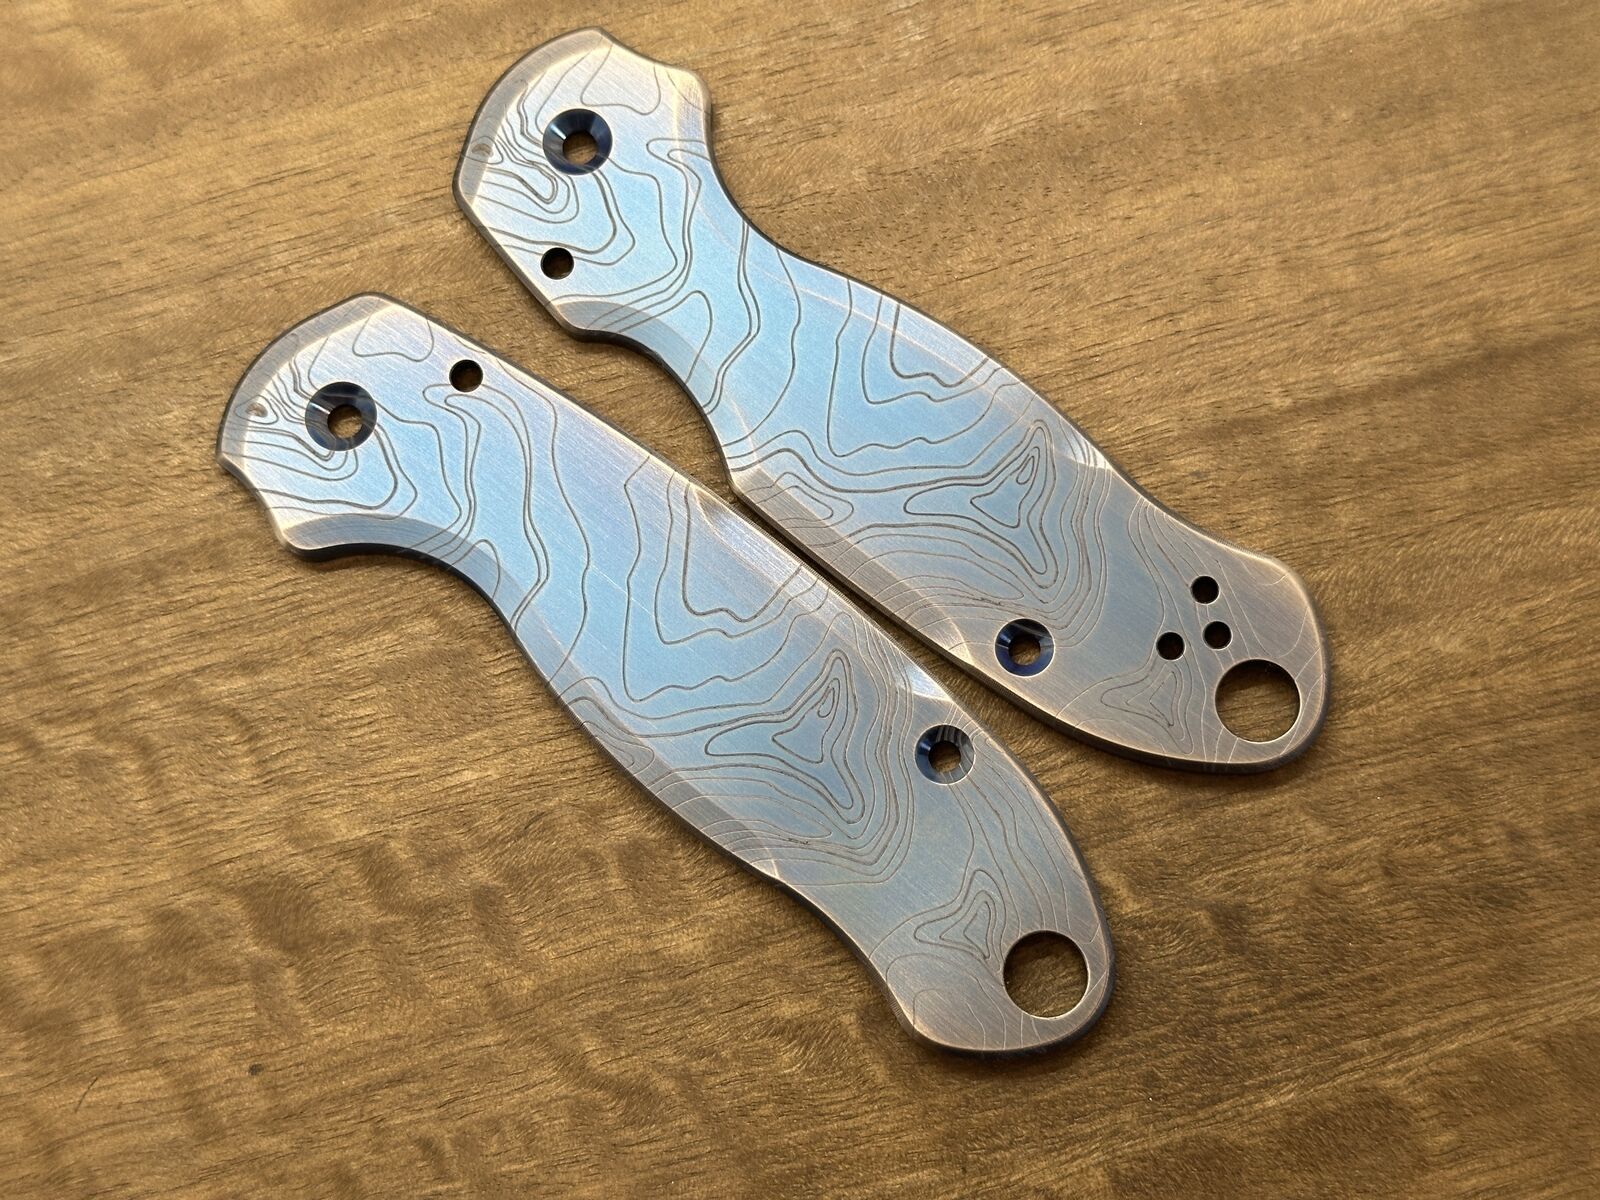 Blue Ano Brushed TOPO engraved Titanium scales for Spyderco Para 3